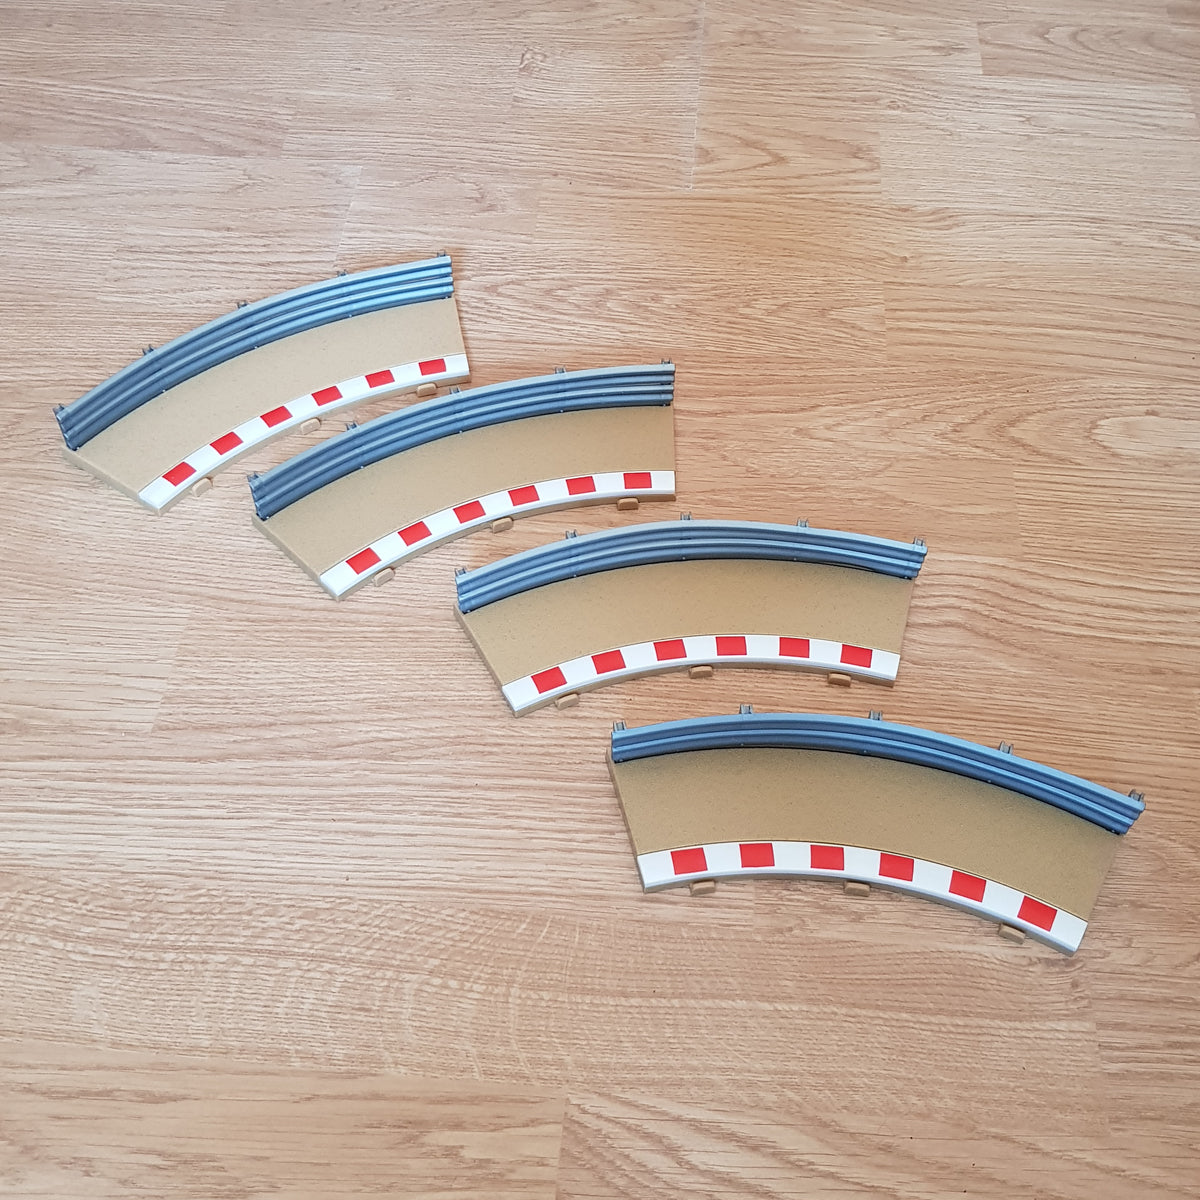 Scalextric 1:32 Track Borders & Barriers Hairpin 'BJ' C8240 Rad1 Outer 45º x4 - Action Slot Racing